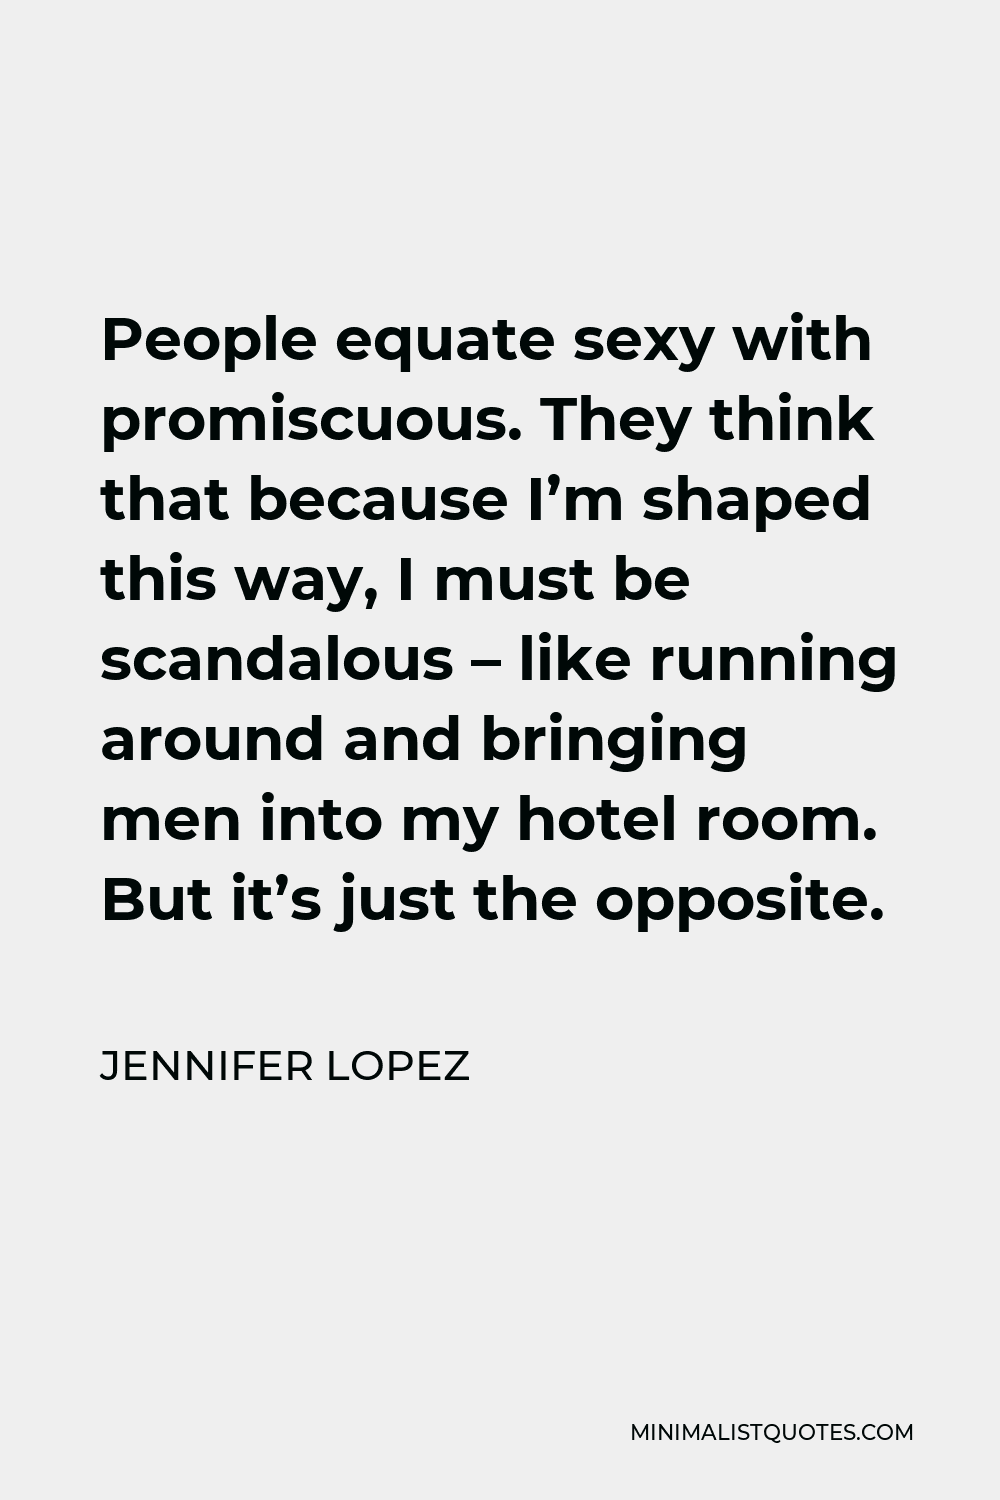 Jennifer Lopez Quote - People equate sexy with promiscuous. They think that because I’m shaped this way, I must be scandalous – like running around and bringing men into my hotel room. But it’s just the opposite.